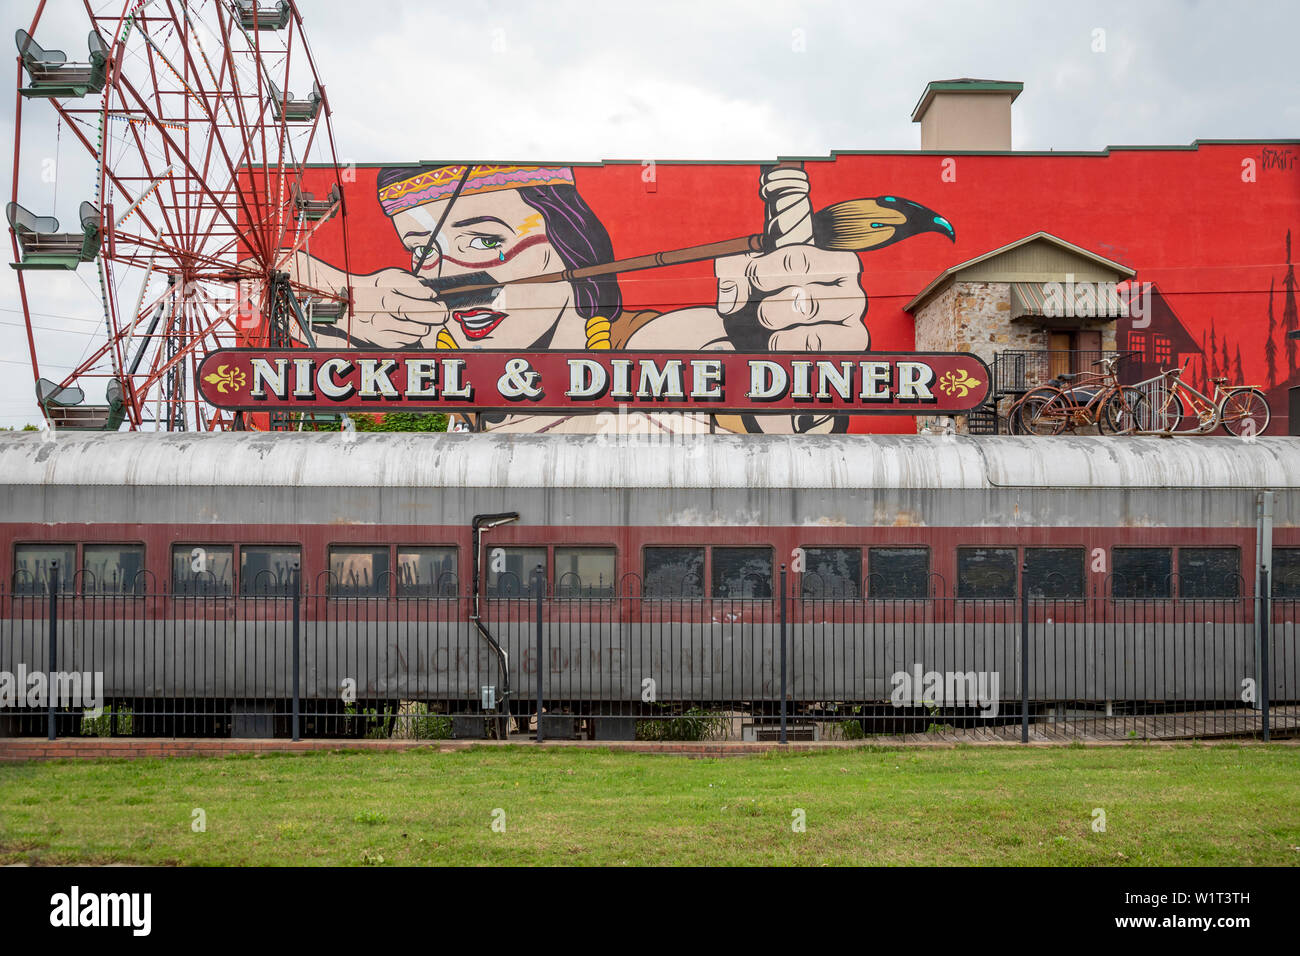 Fort Smith, Arkansas - The Nickel & Dime Diner, below wall art and a Ferris wheel. The painting is 'War Paint' by a British artist known as D*FACE, wh Stock Photo